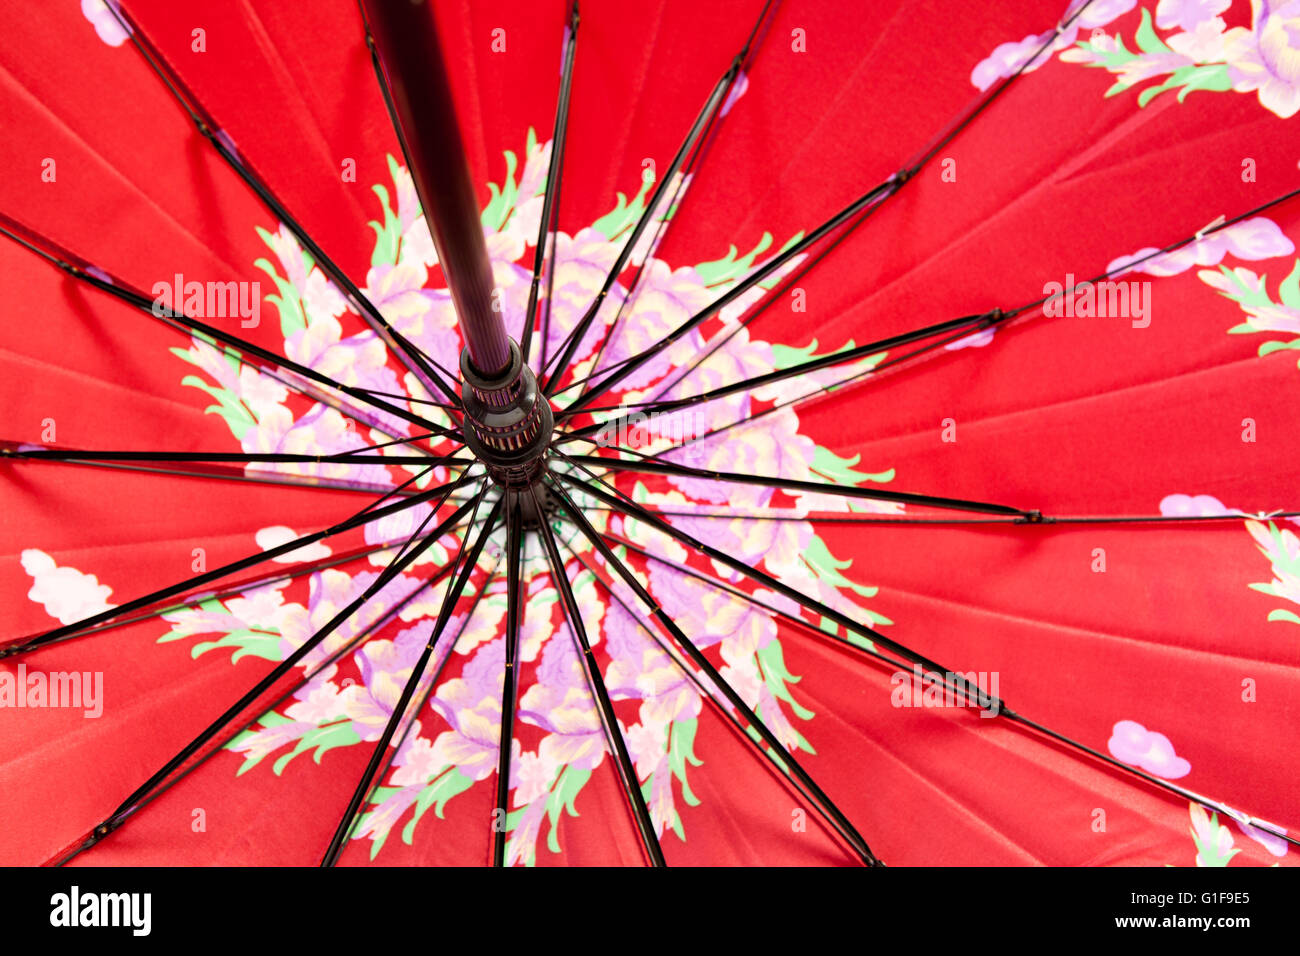 an open umbrella in close up with motive Stock Photo